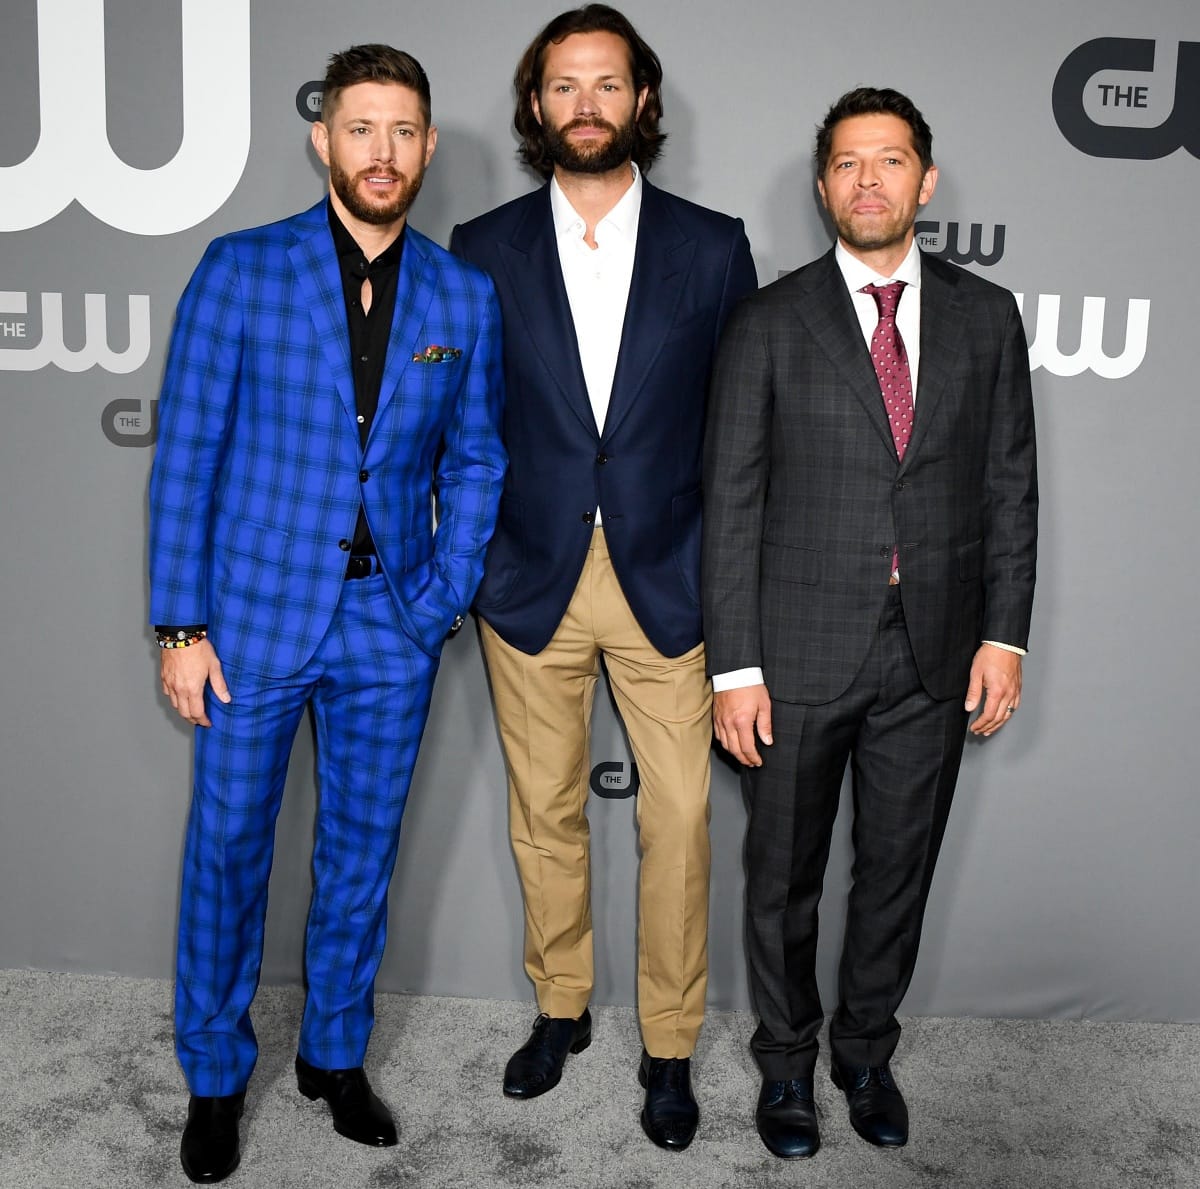 Jared Padalecki towering over Supernatural co-stars Jensen Ackles and Misha Collins at the 2019 CW Network Upfront